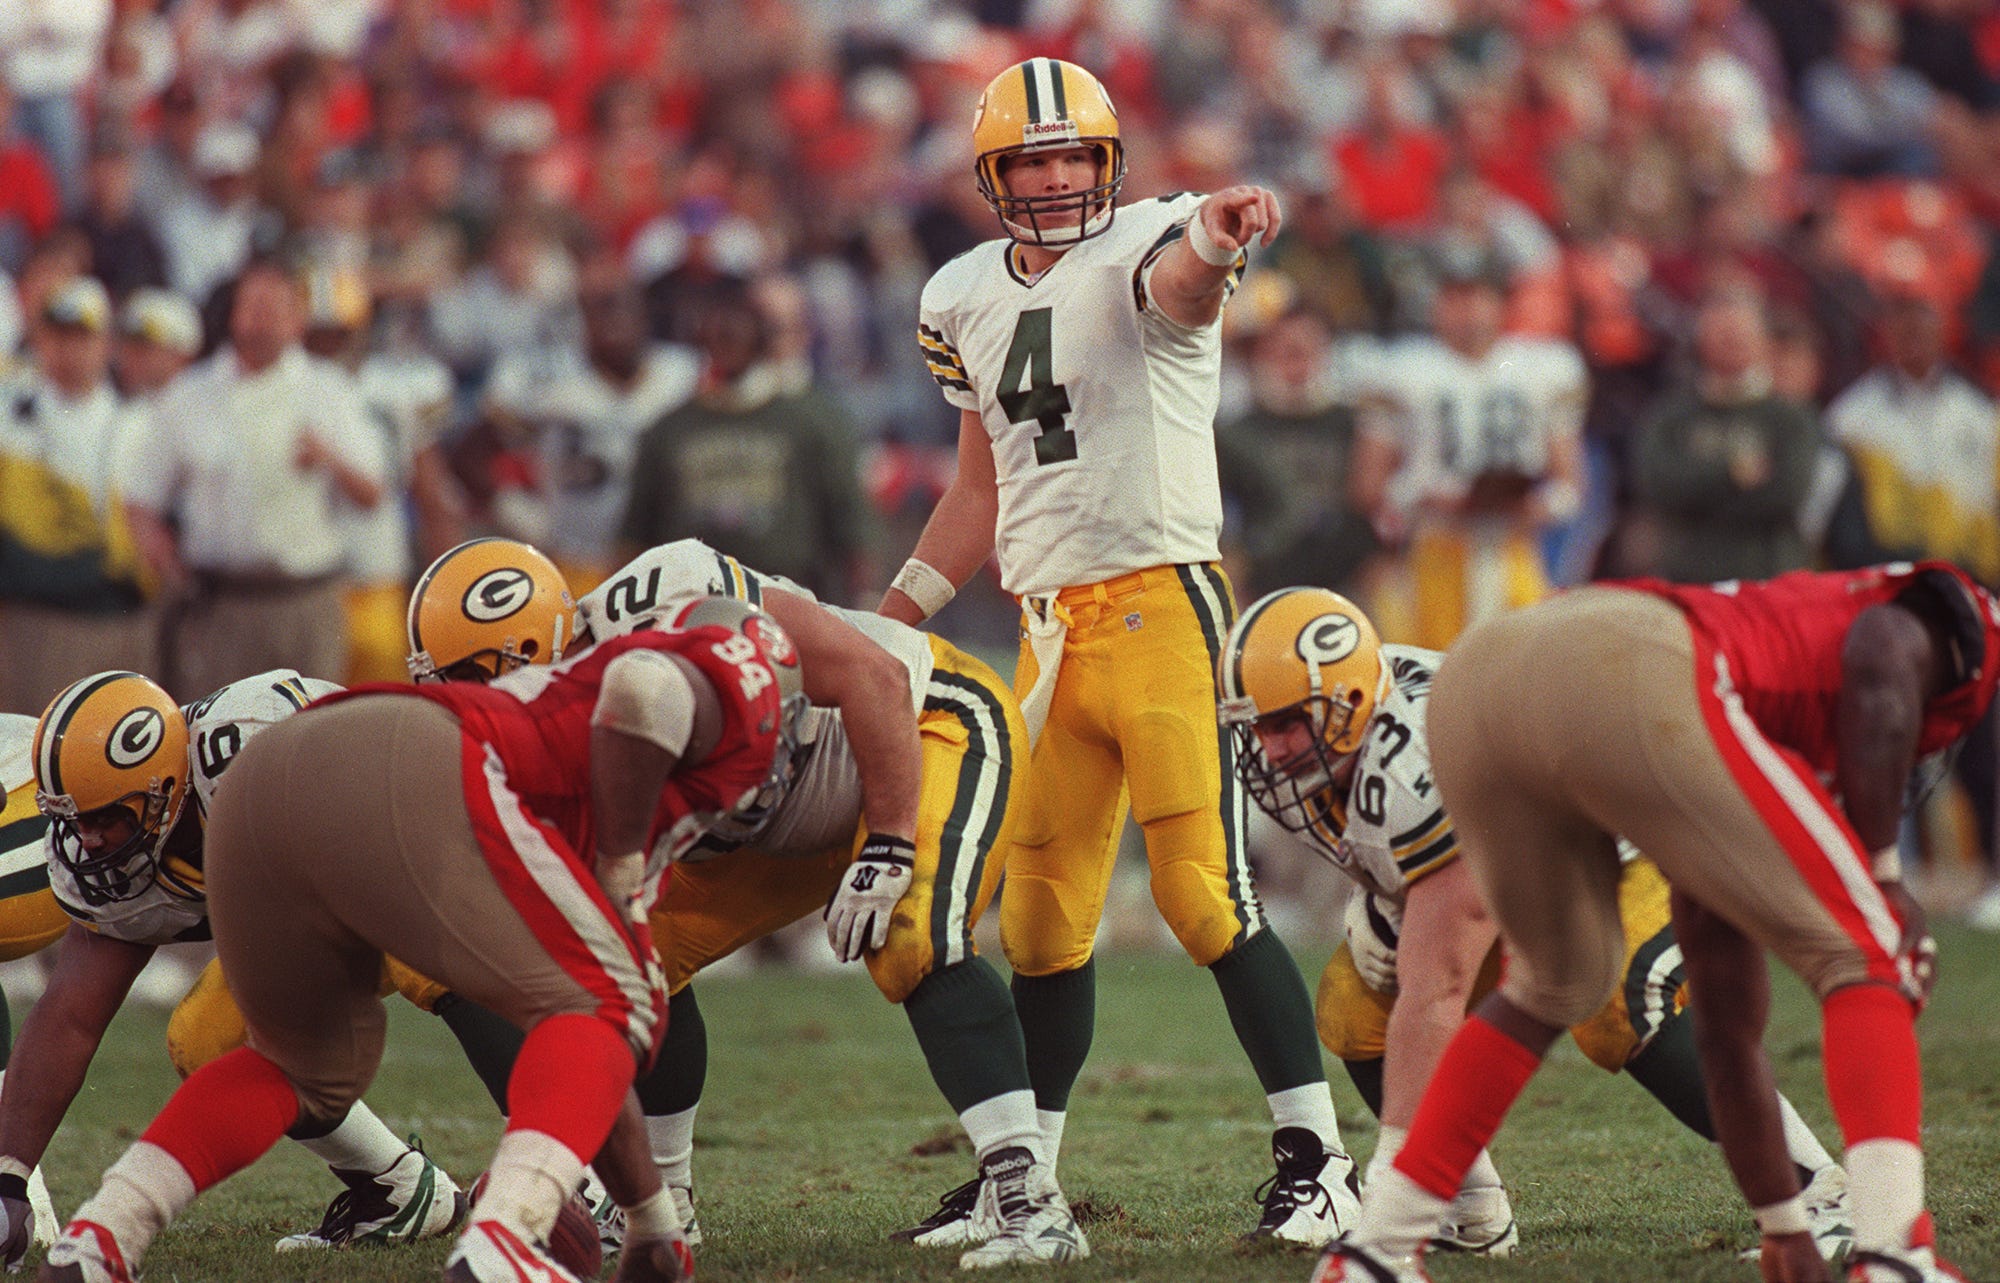 MJS: Packers video clip